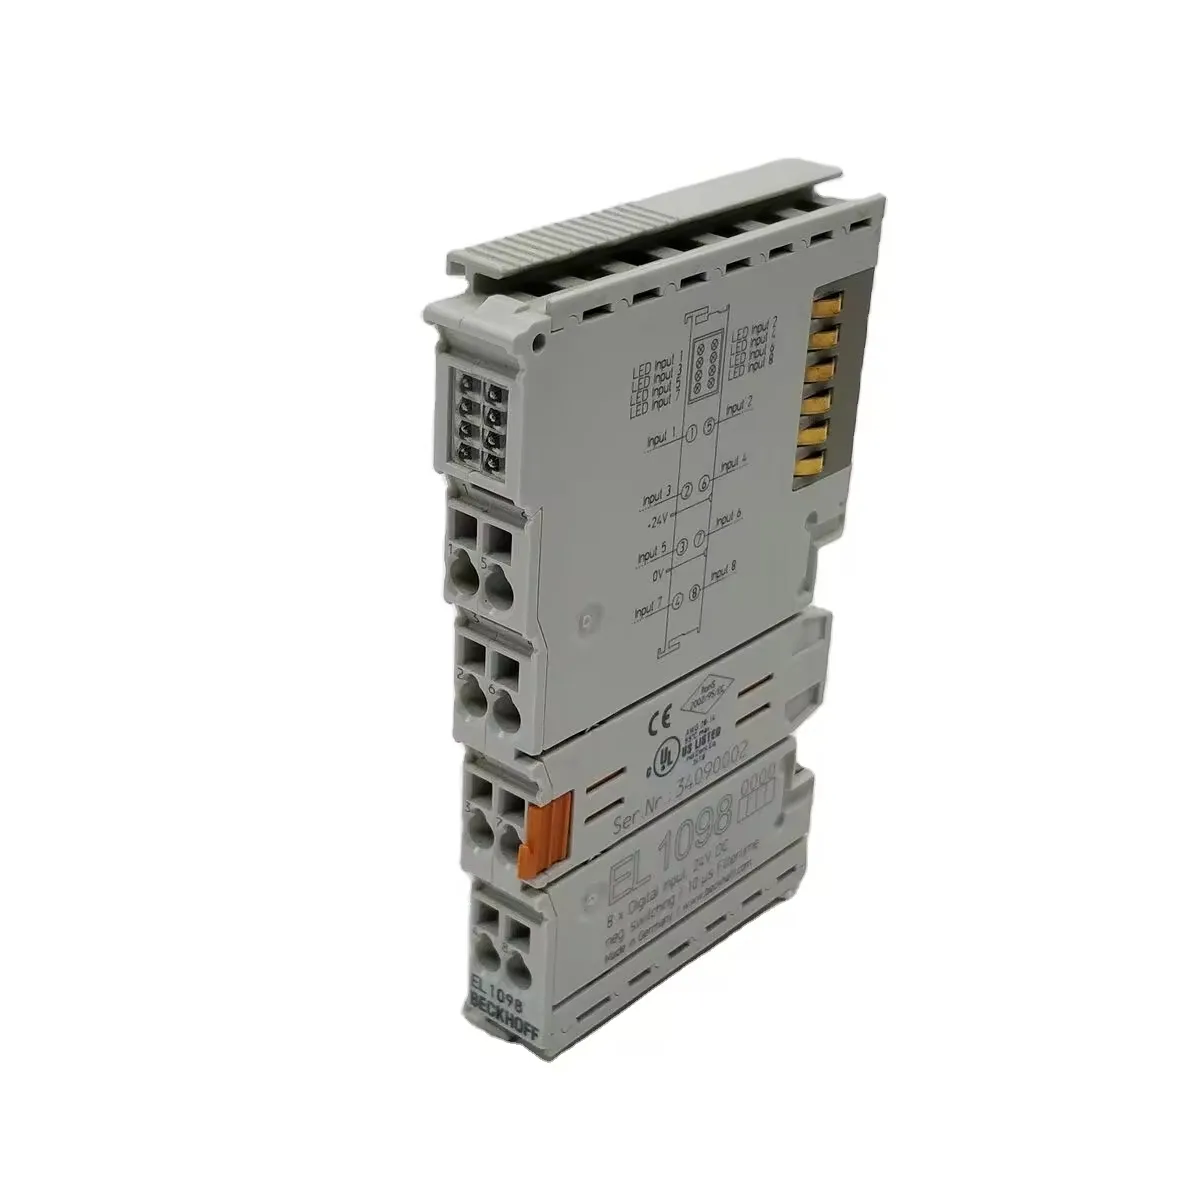 EL1098 PLC brand new boxed fast delivery with a 12-month warranty EL1098